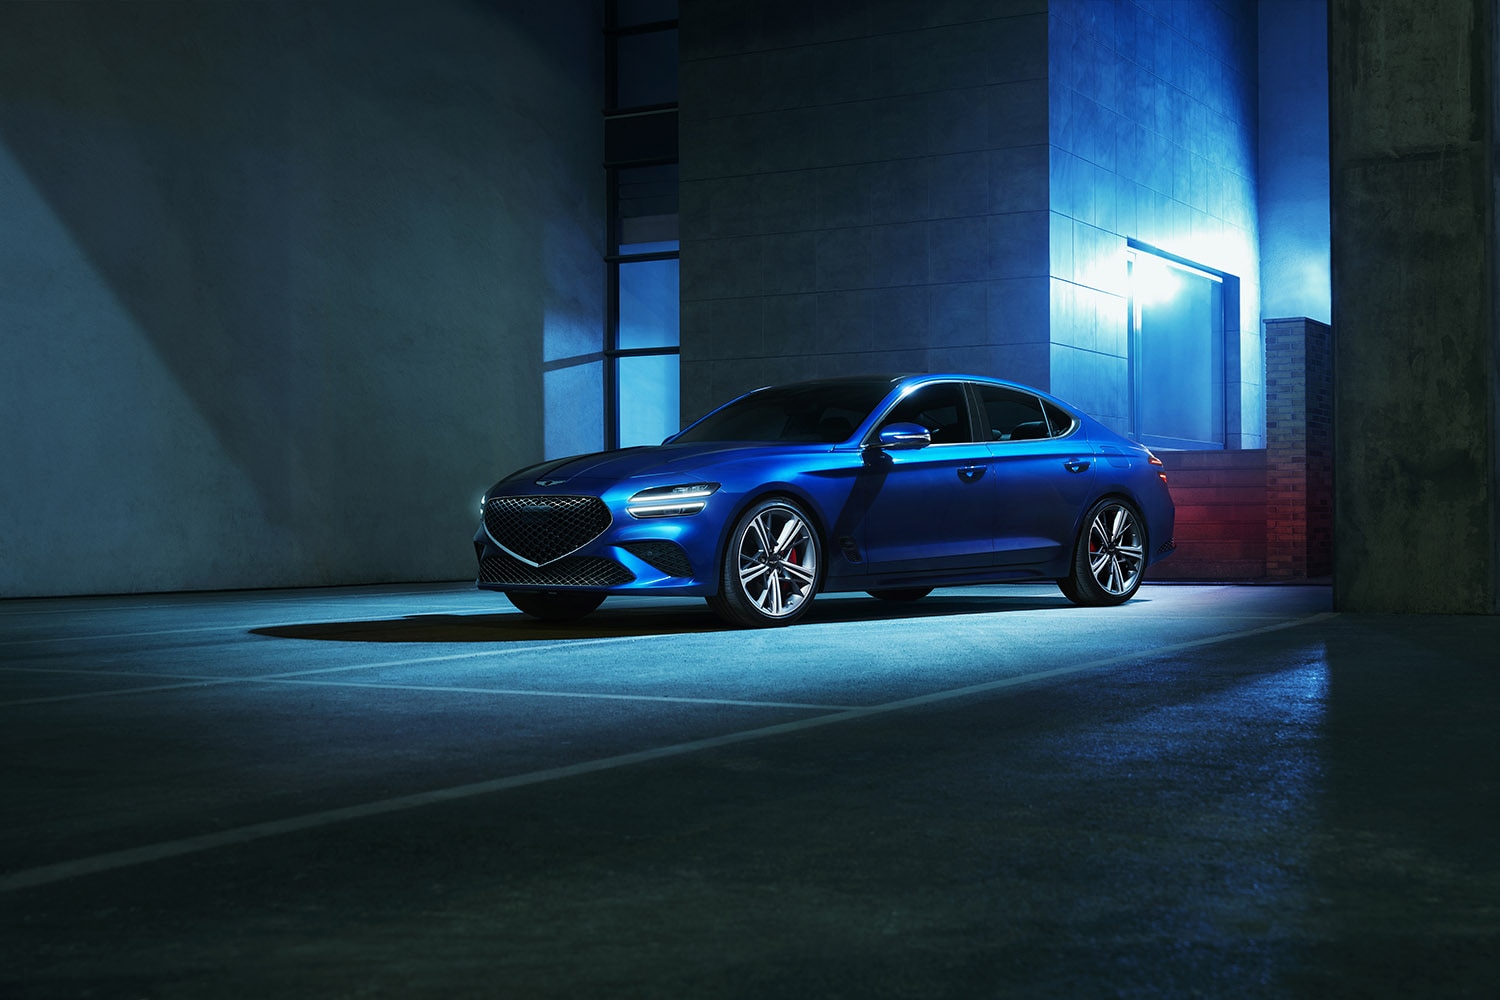 2023 Genesis G70 in blue parked by a dramatically illuminated building